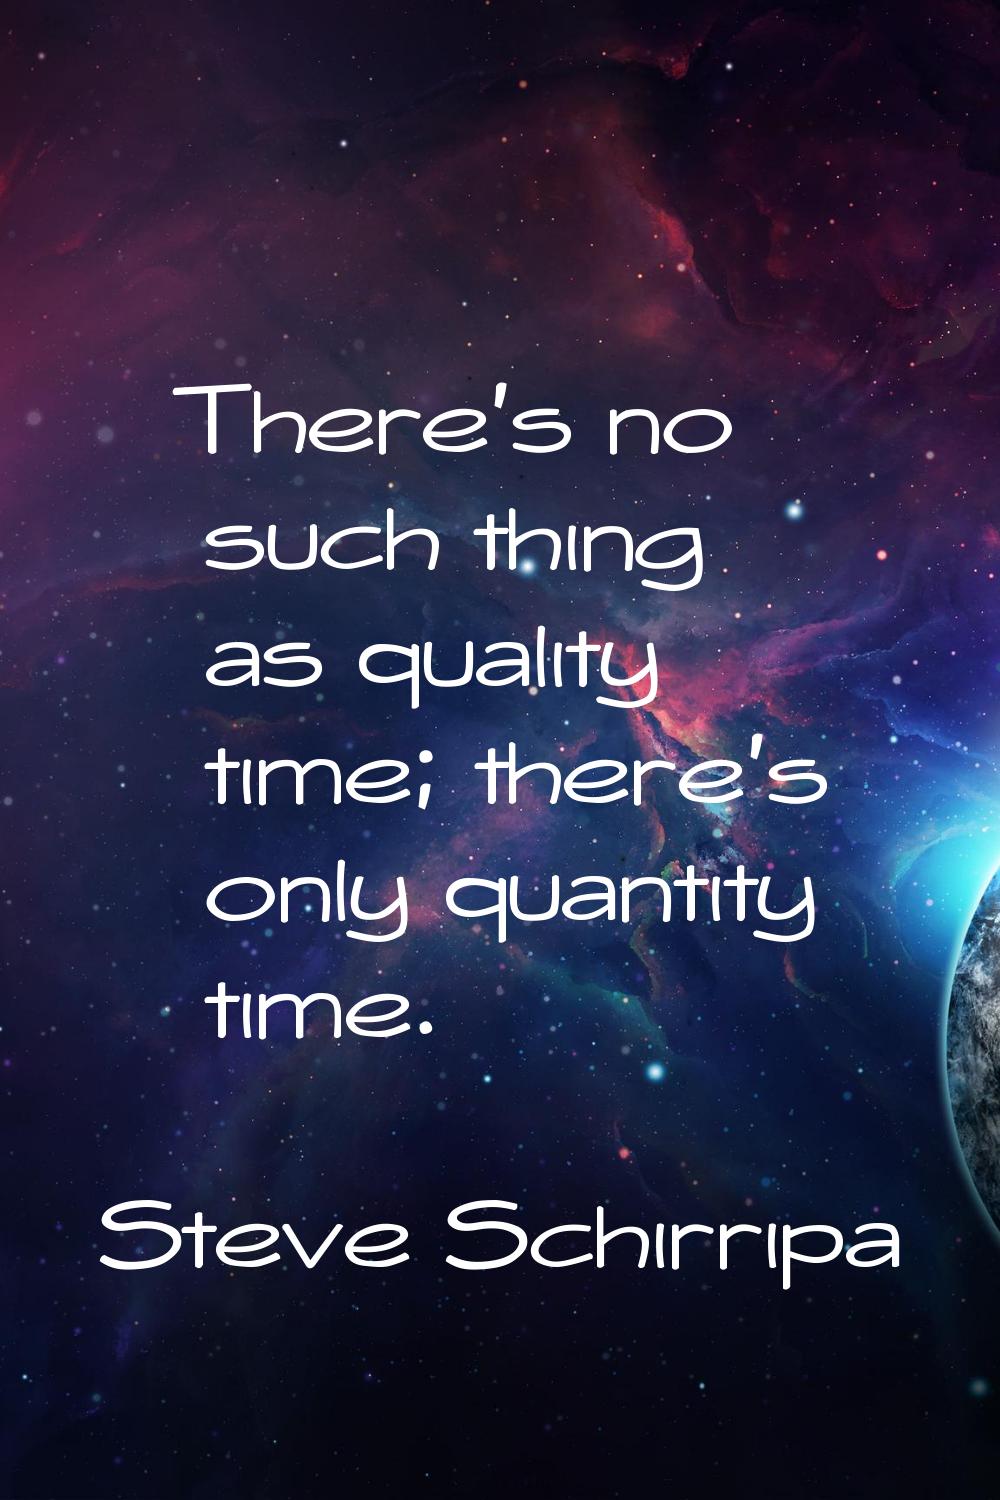 There's no such thing as quality time; there's only quantity time.